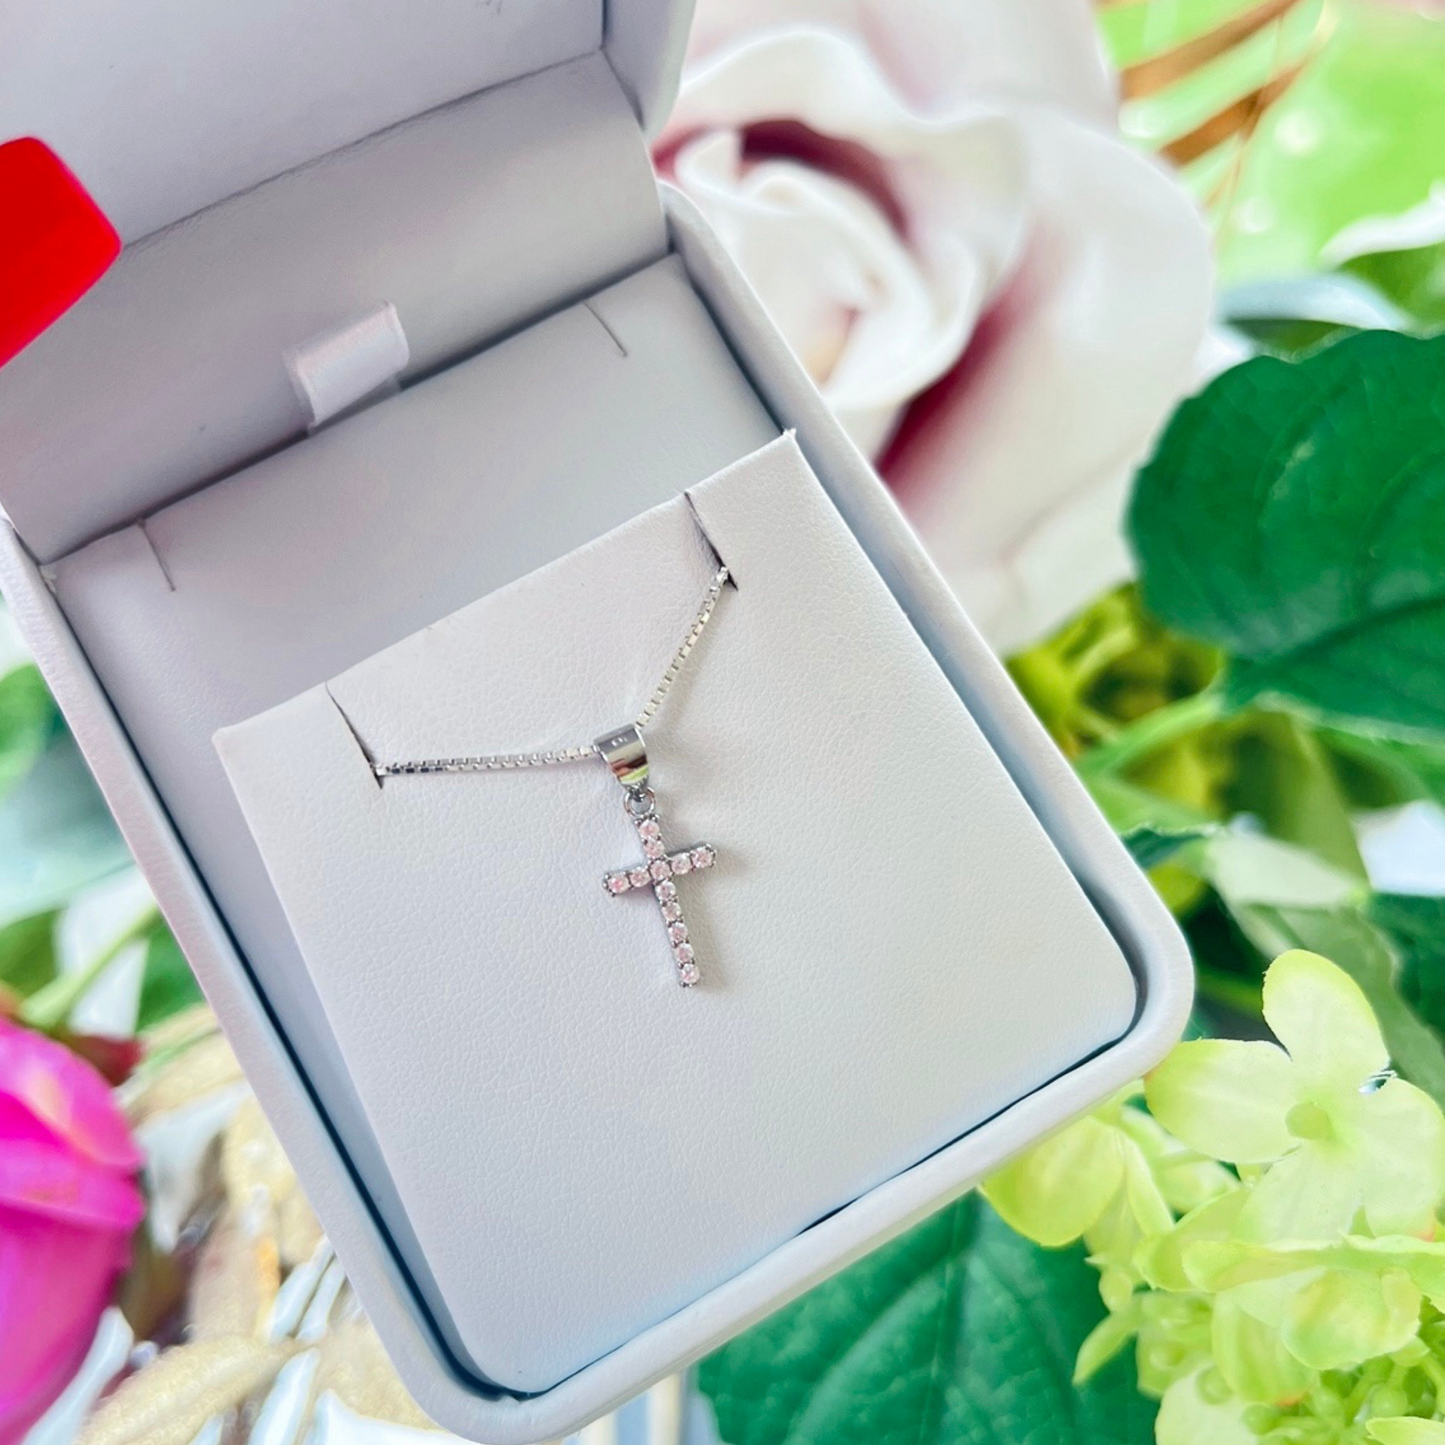 childs cross necklace